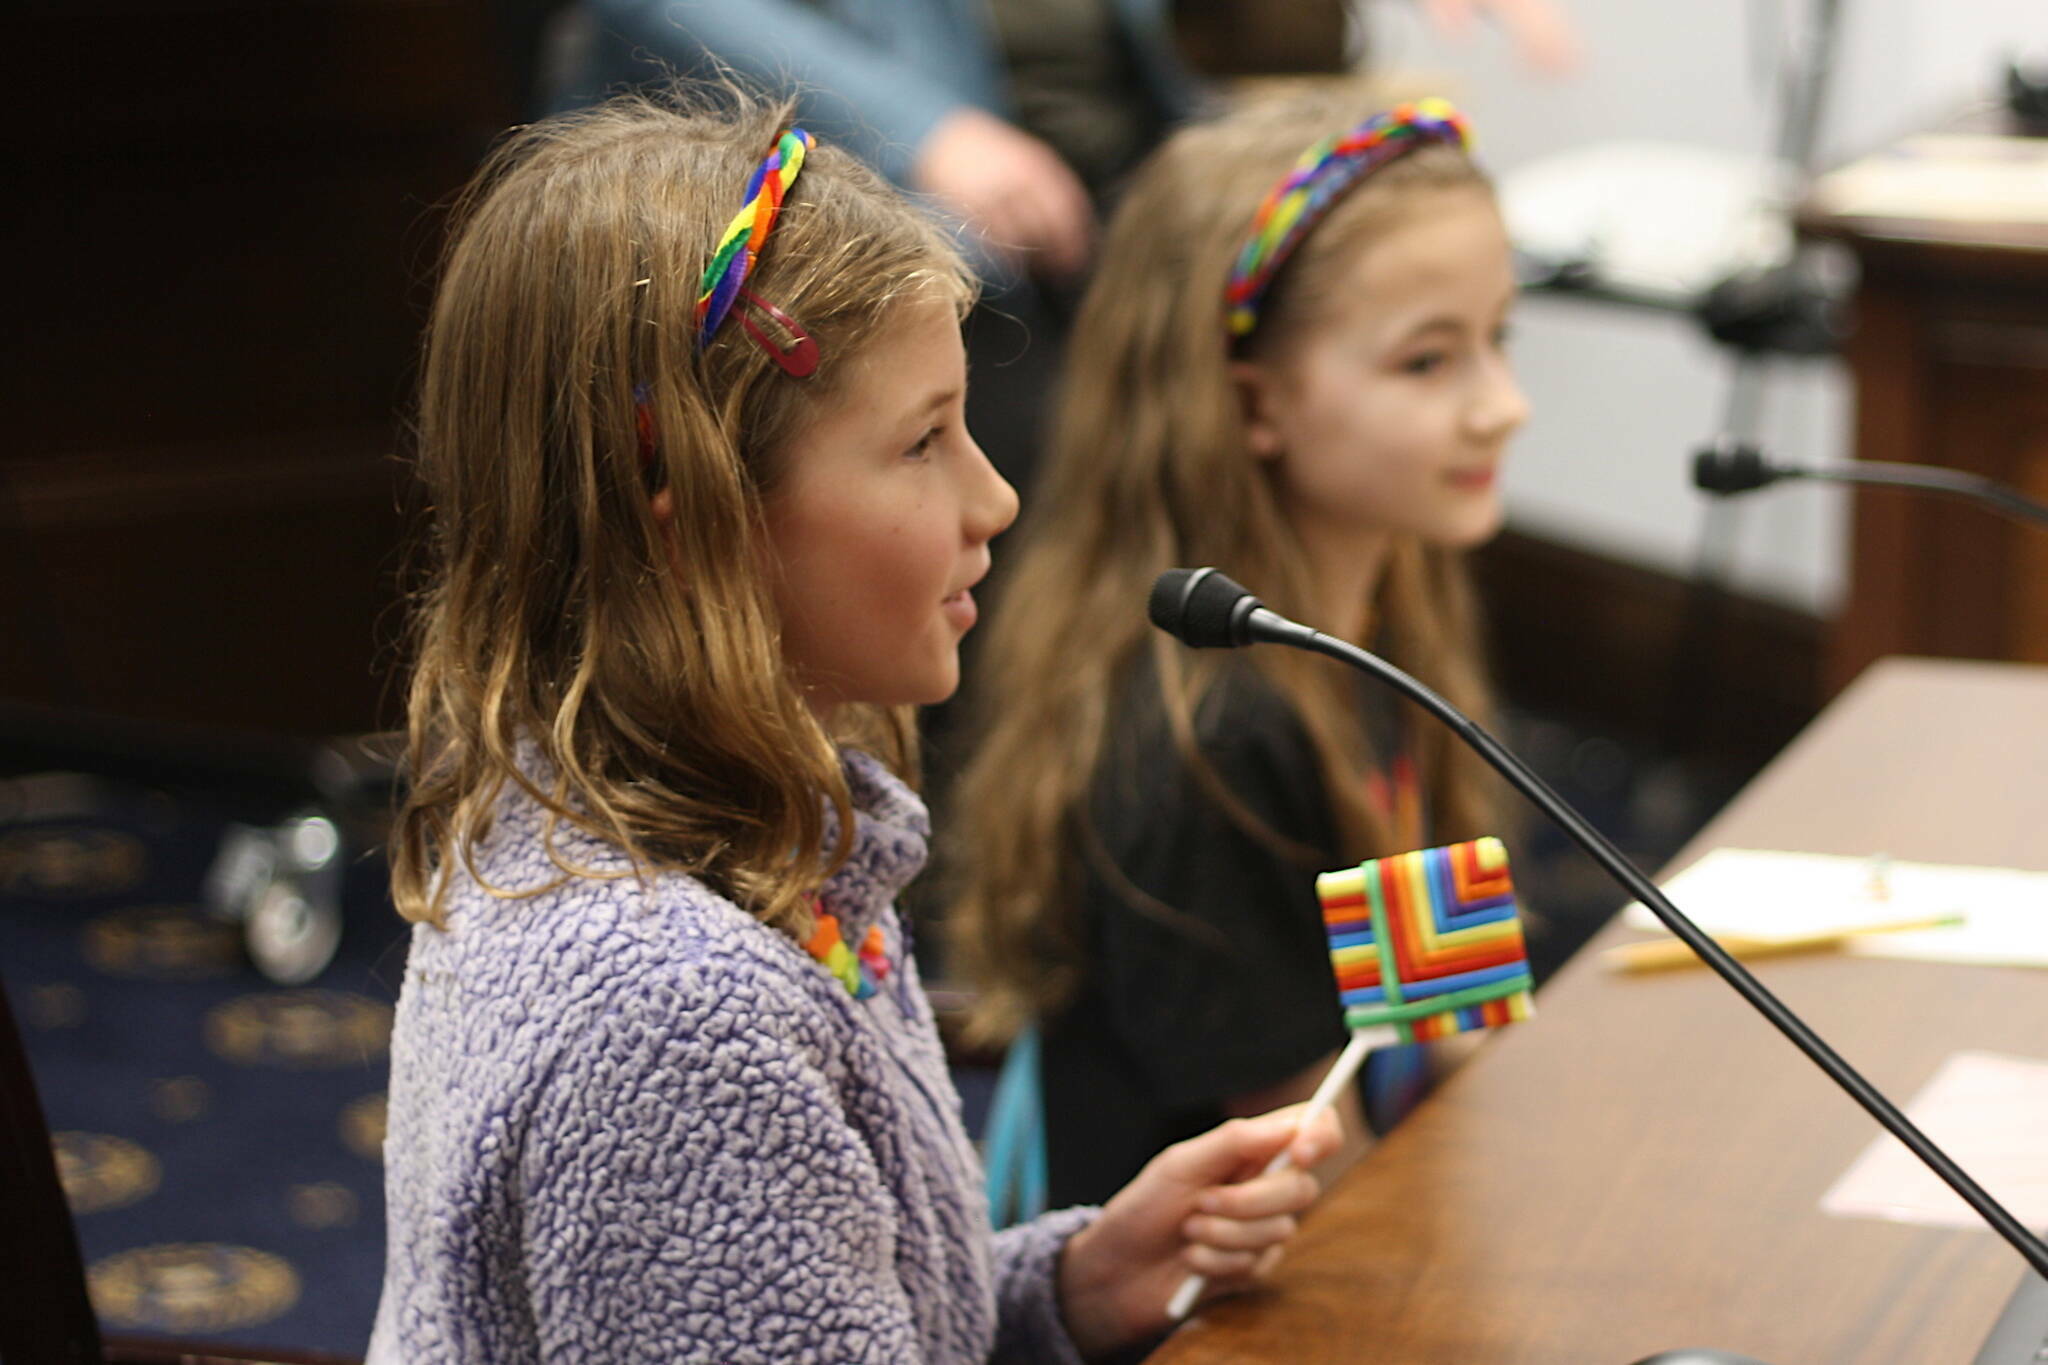 Nayeli Hood, 10, foreground, and Ona Eckerson, 9, testify against a bill limiting sex and gender content in schools during a House Education Committee meeting March 30, 2023. Education is again expected to be a dominant issue during the coming legislative session. (Mark Sabbatini / Juneau Empire file photo)